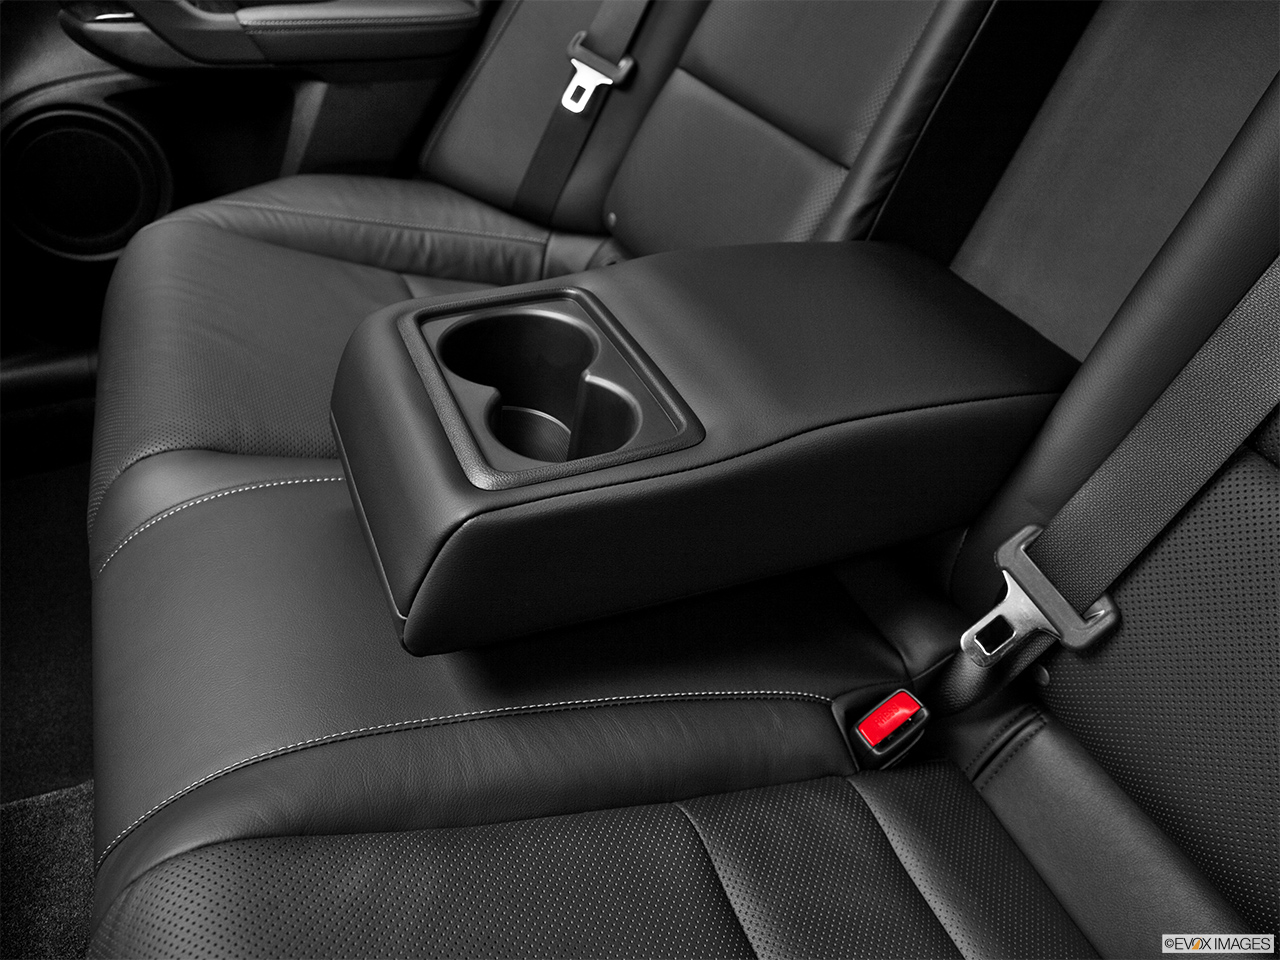 2012 Acura TSX TSX 5-speed Automatic Rear center console with closed lid from driver's side looking down. 